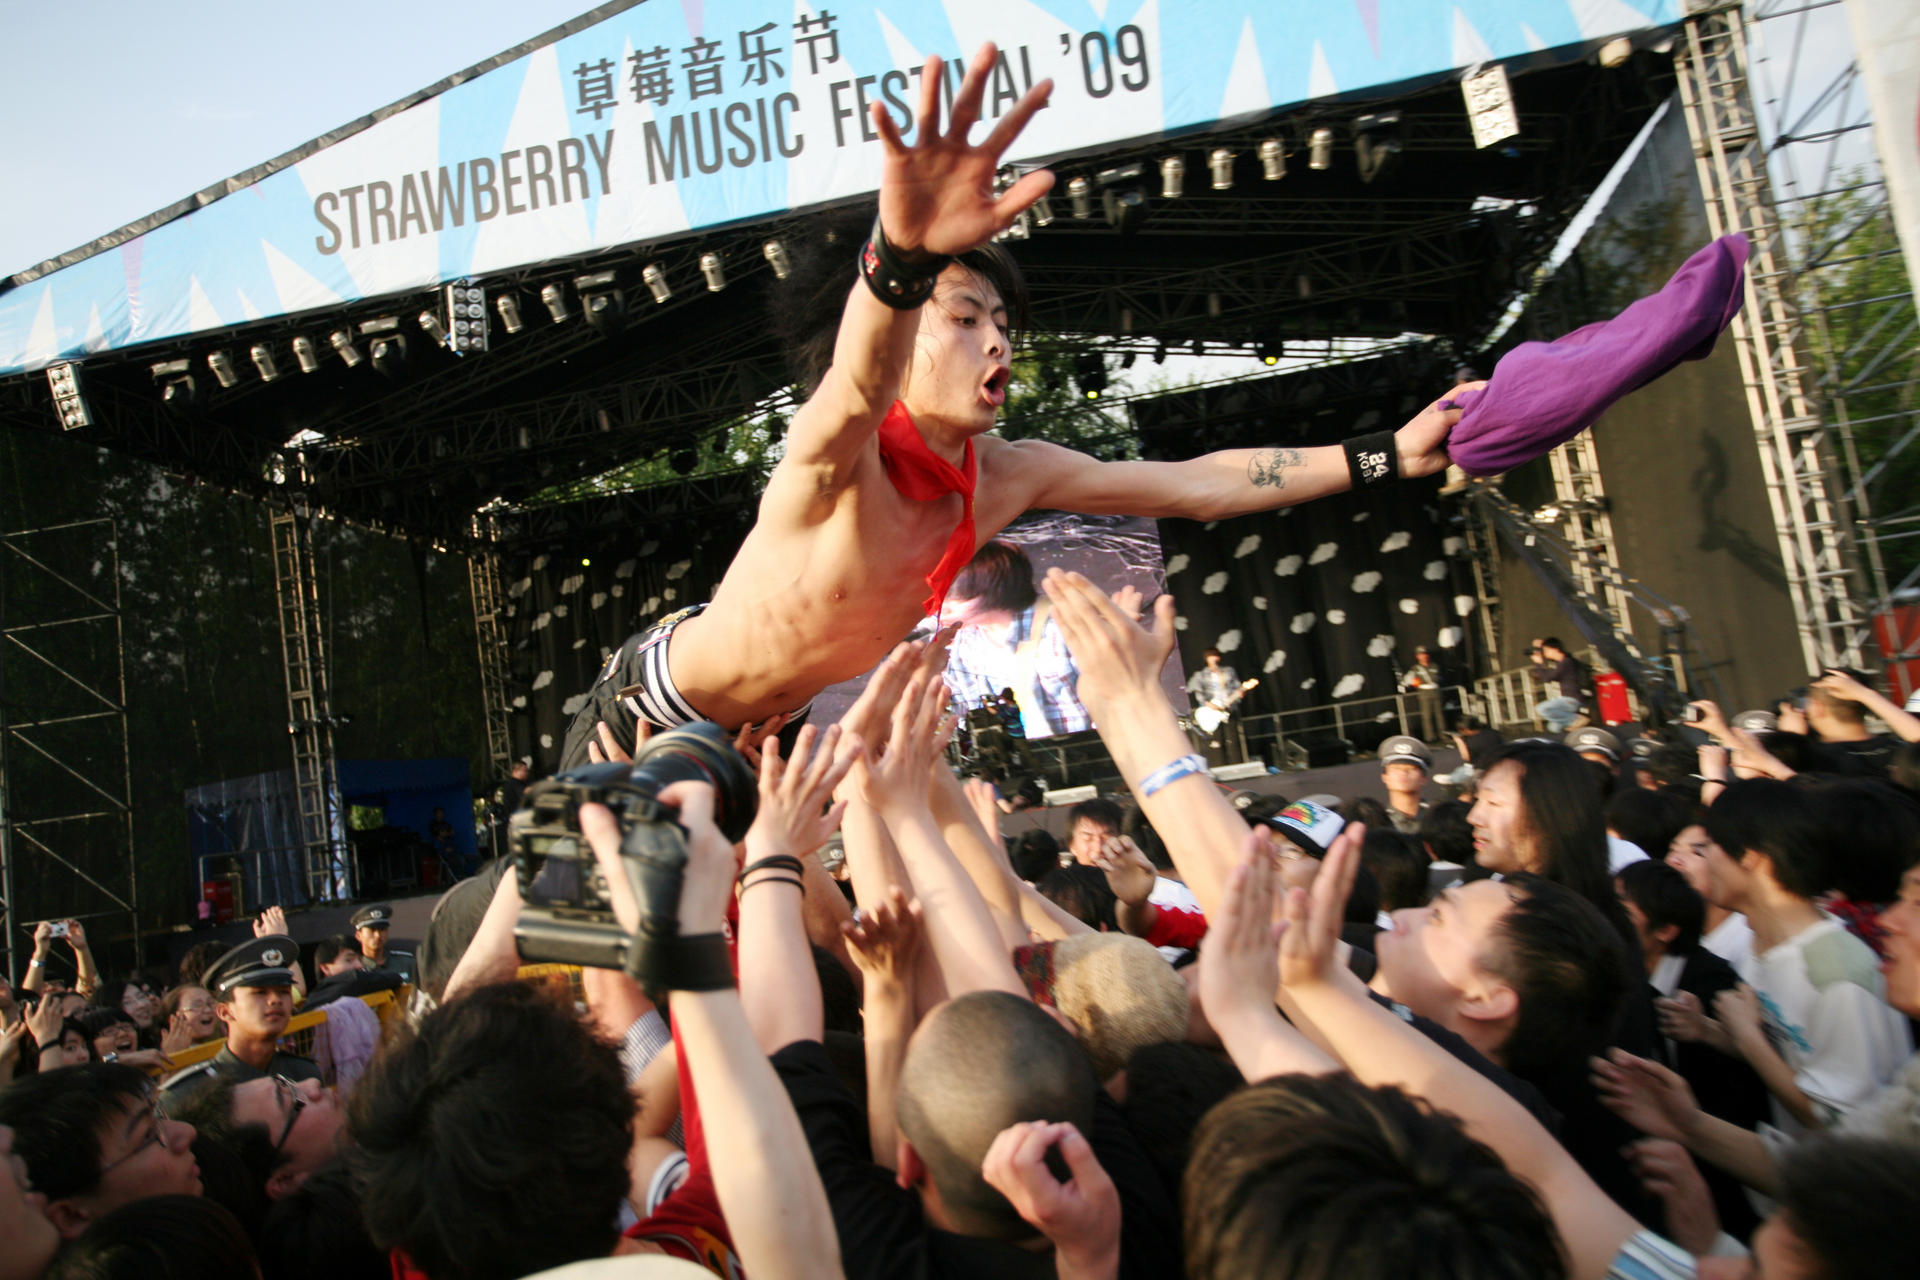 Don't stop me now: fans at the Strawberry Music Festival in Beijing. Photo: Corbis